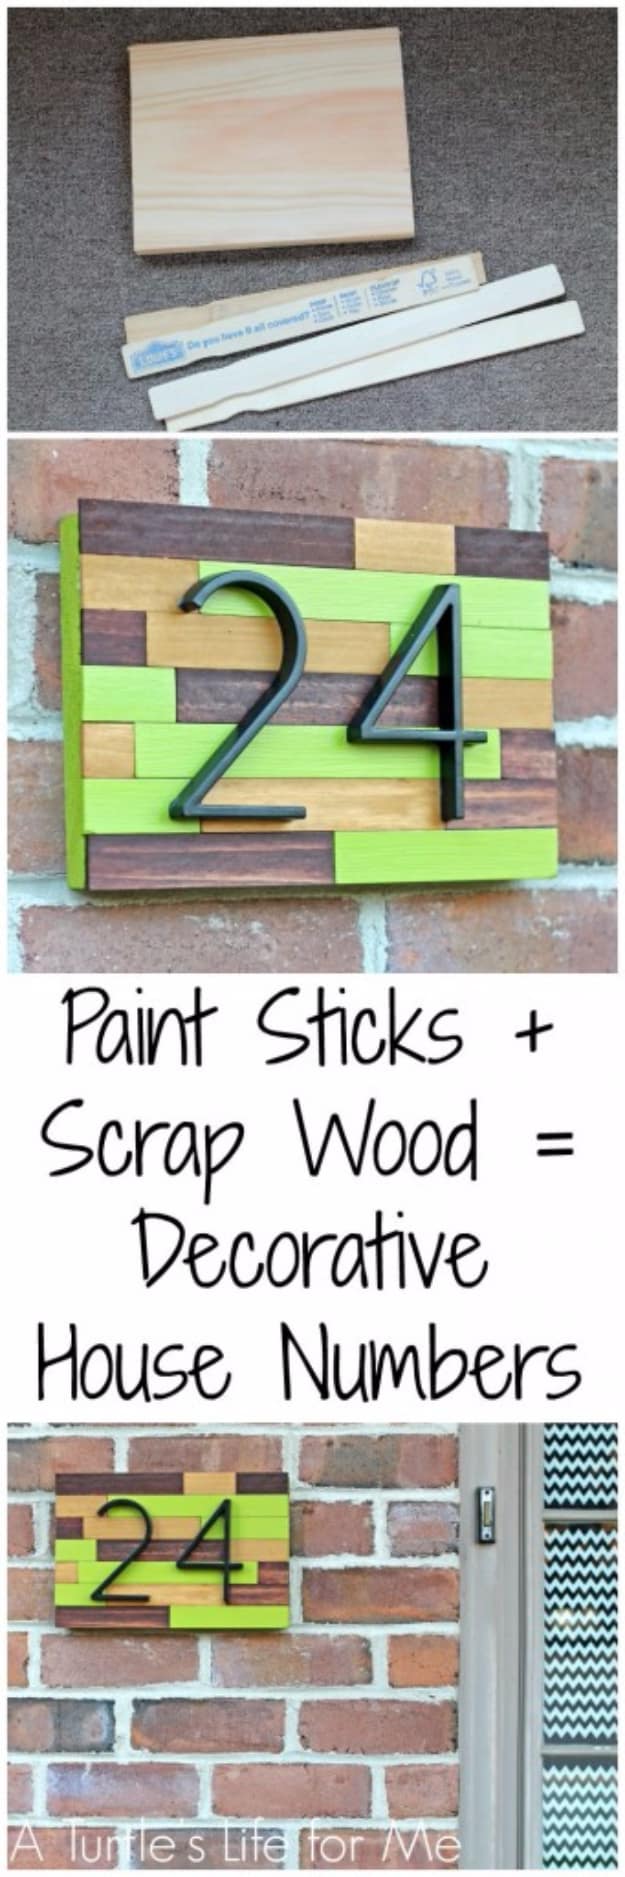 Creative Ways to Increase Curb Appeal on A Budget - House Number Plaque DIY - Cheap and Easy Ideas for Upgrading Your Front Porch, Landscaping, Driveways, Garage Doors, Brick and Home Exteriors. Add Window Boxes, House Numbers, Mailboxes and Yard Makeovers http://diyjoy.com/diy-curb-appeal-ideas